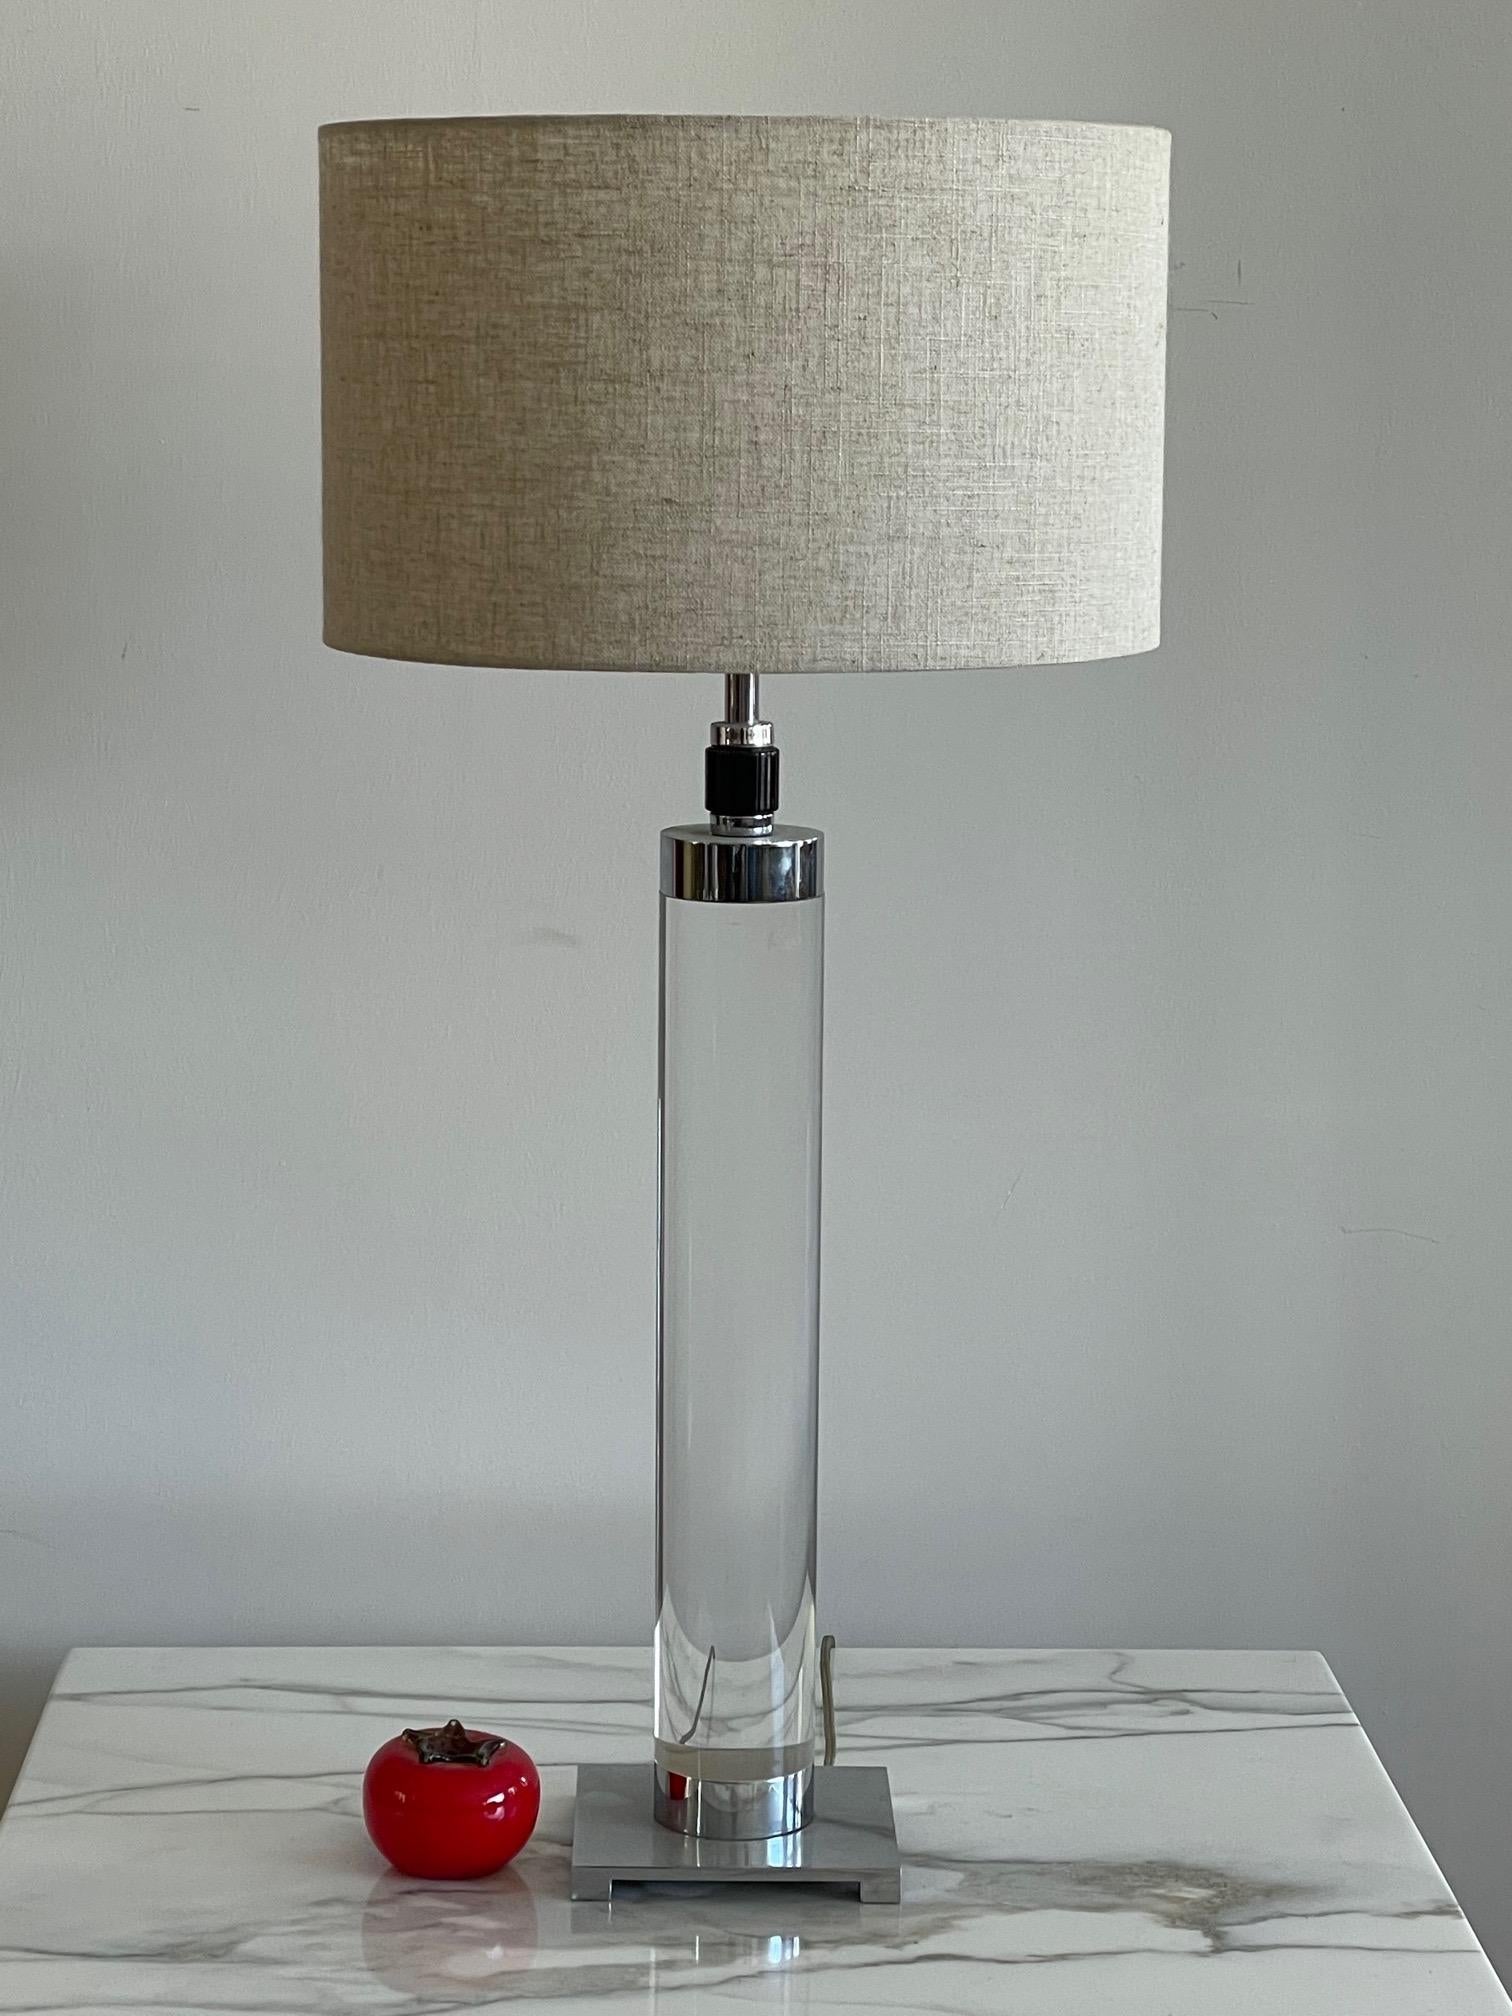 A classic Hansen, New York, signed table lamp. Chromed steel with glass rod and three way switch on top.